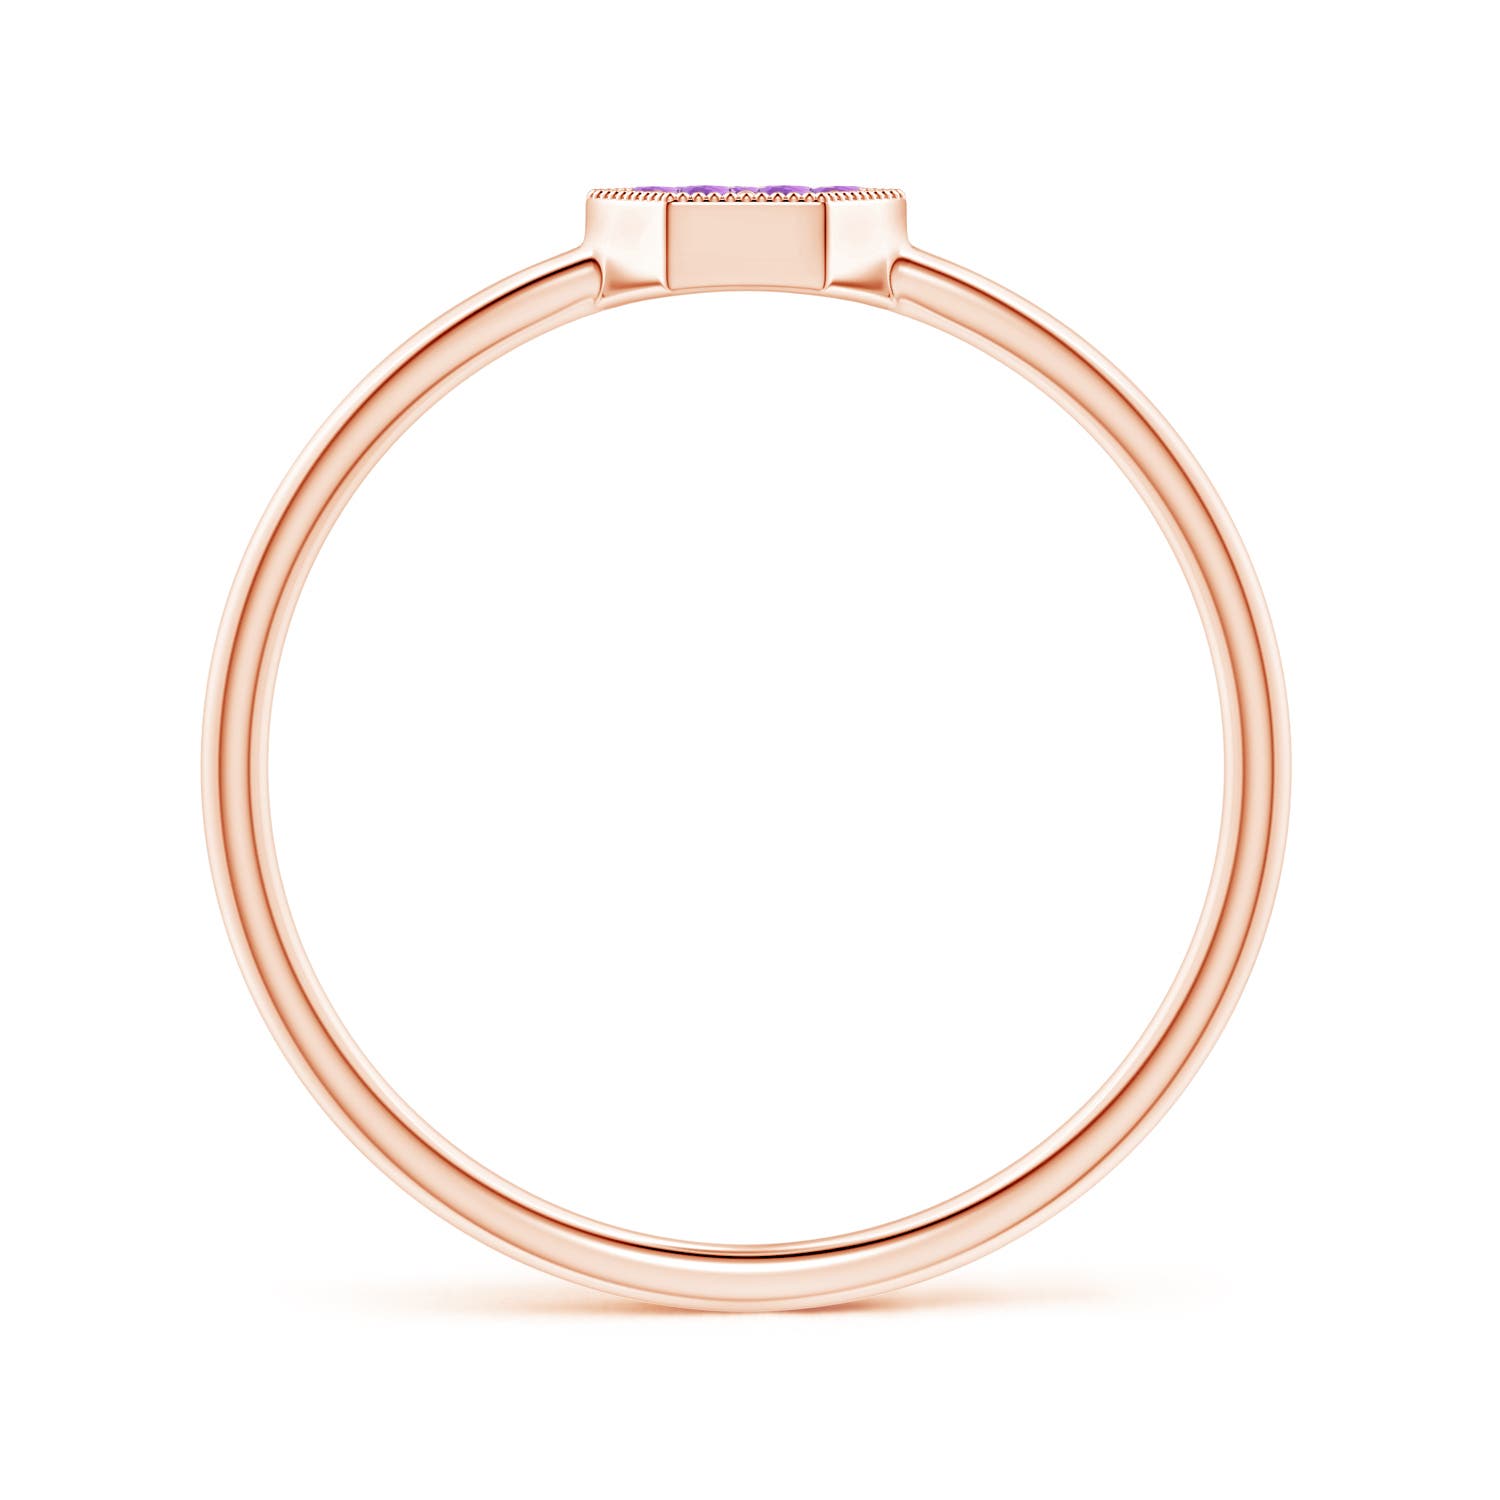 AAA - Amethyst / 0.1 CT / 14 KT Rose Gold